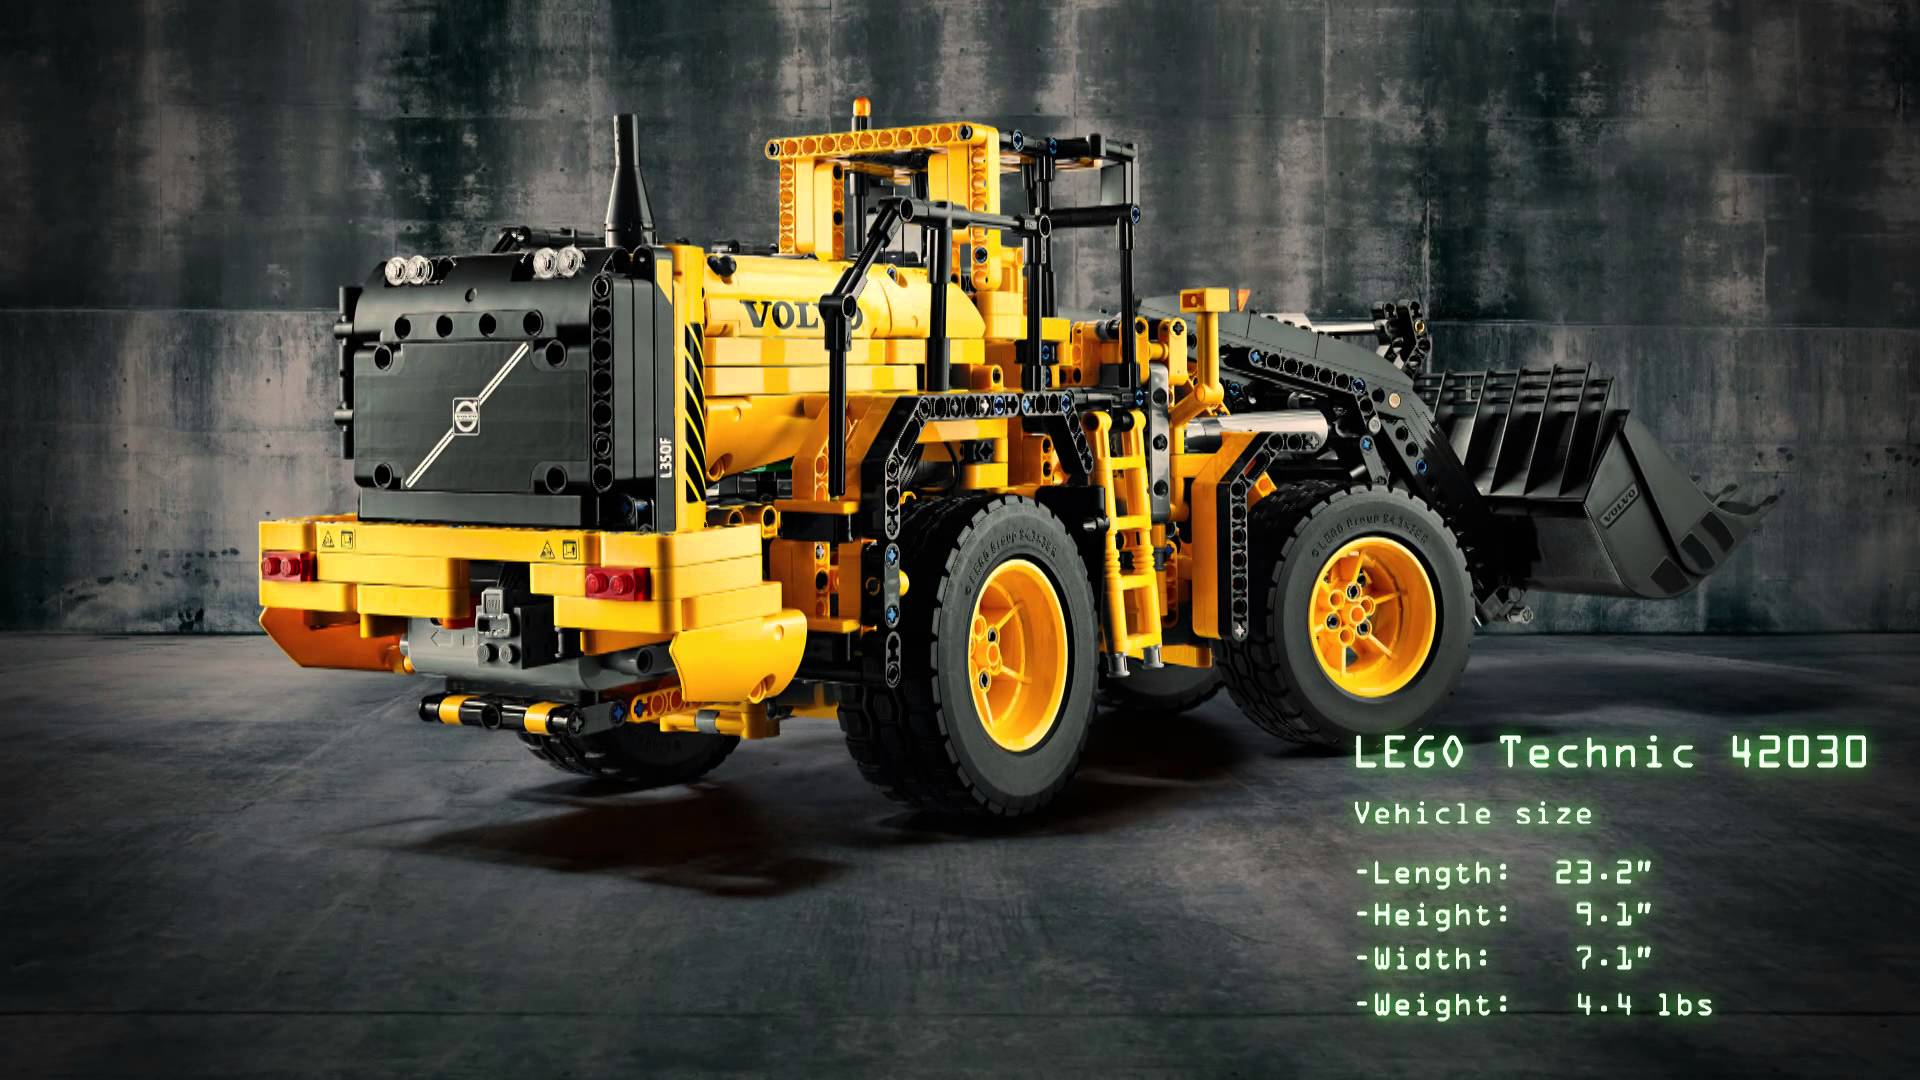 LEGO Technic Introduces the Volvo Wheel Loader and Articulated